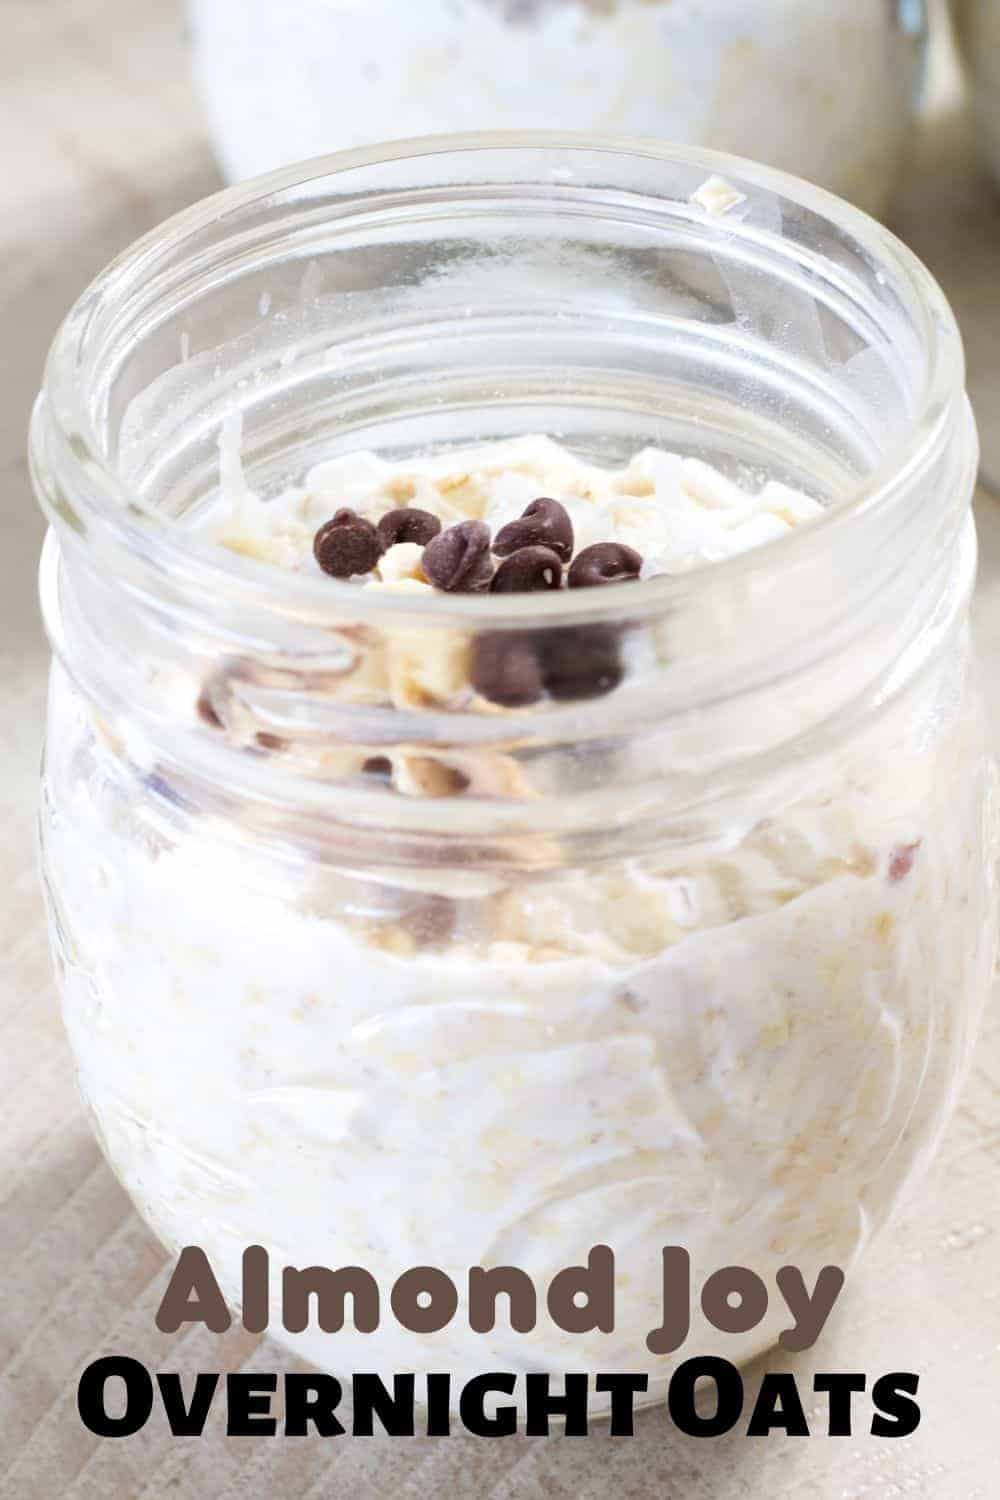 Almond Joy Overnight Oats is a great six ingredient low calorie make ahead meal prep breakfast that is healthy and delicious! #mealprep #makeaheadrecipe #ovenightoats via @mindyscookingobsession